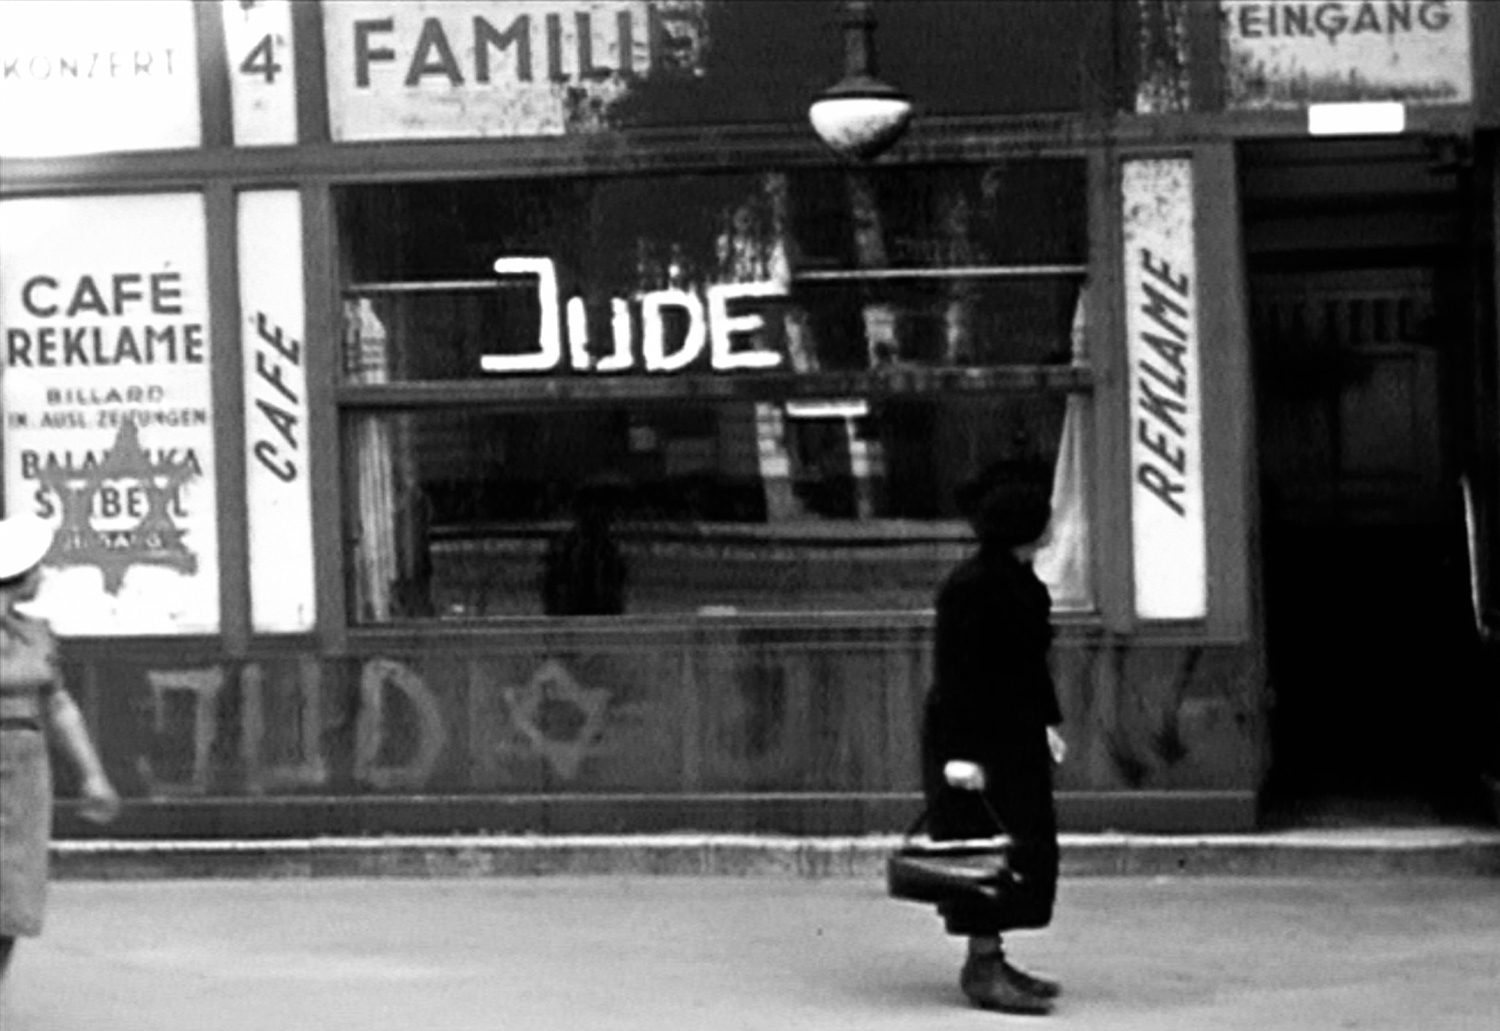 A Jewish-owned store painted with the word "Jude" (Jew) and the Star of David, Germany, late 1930s.